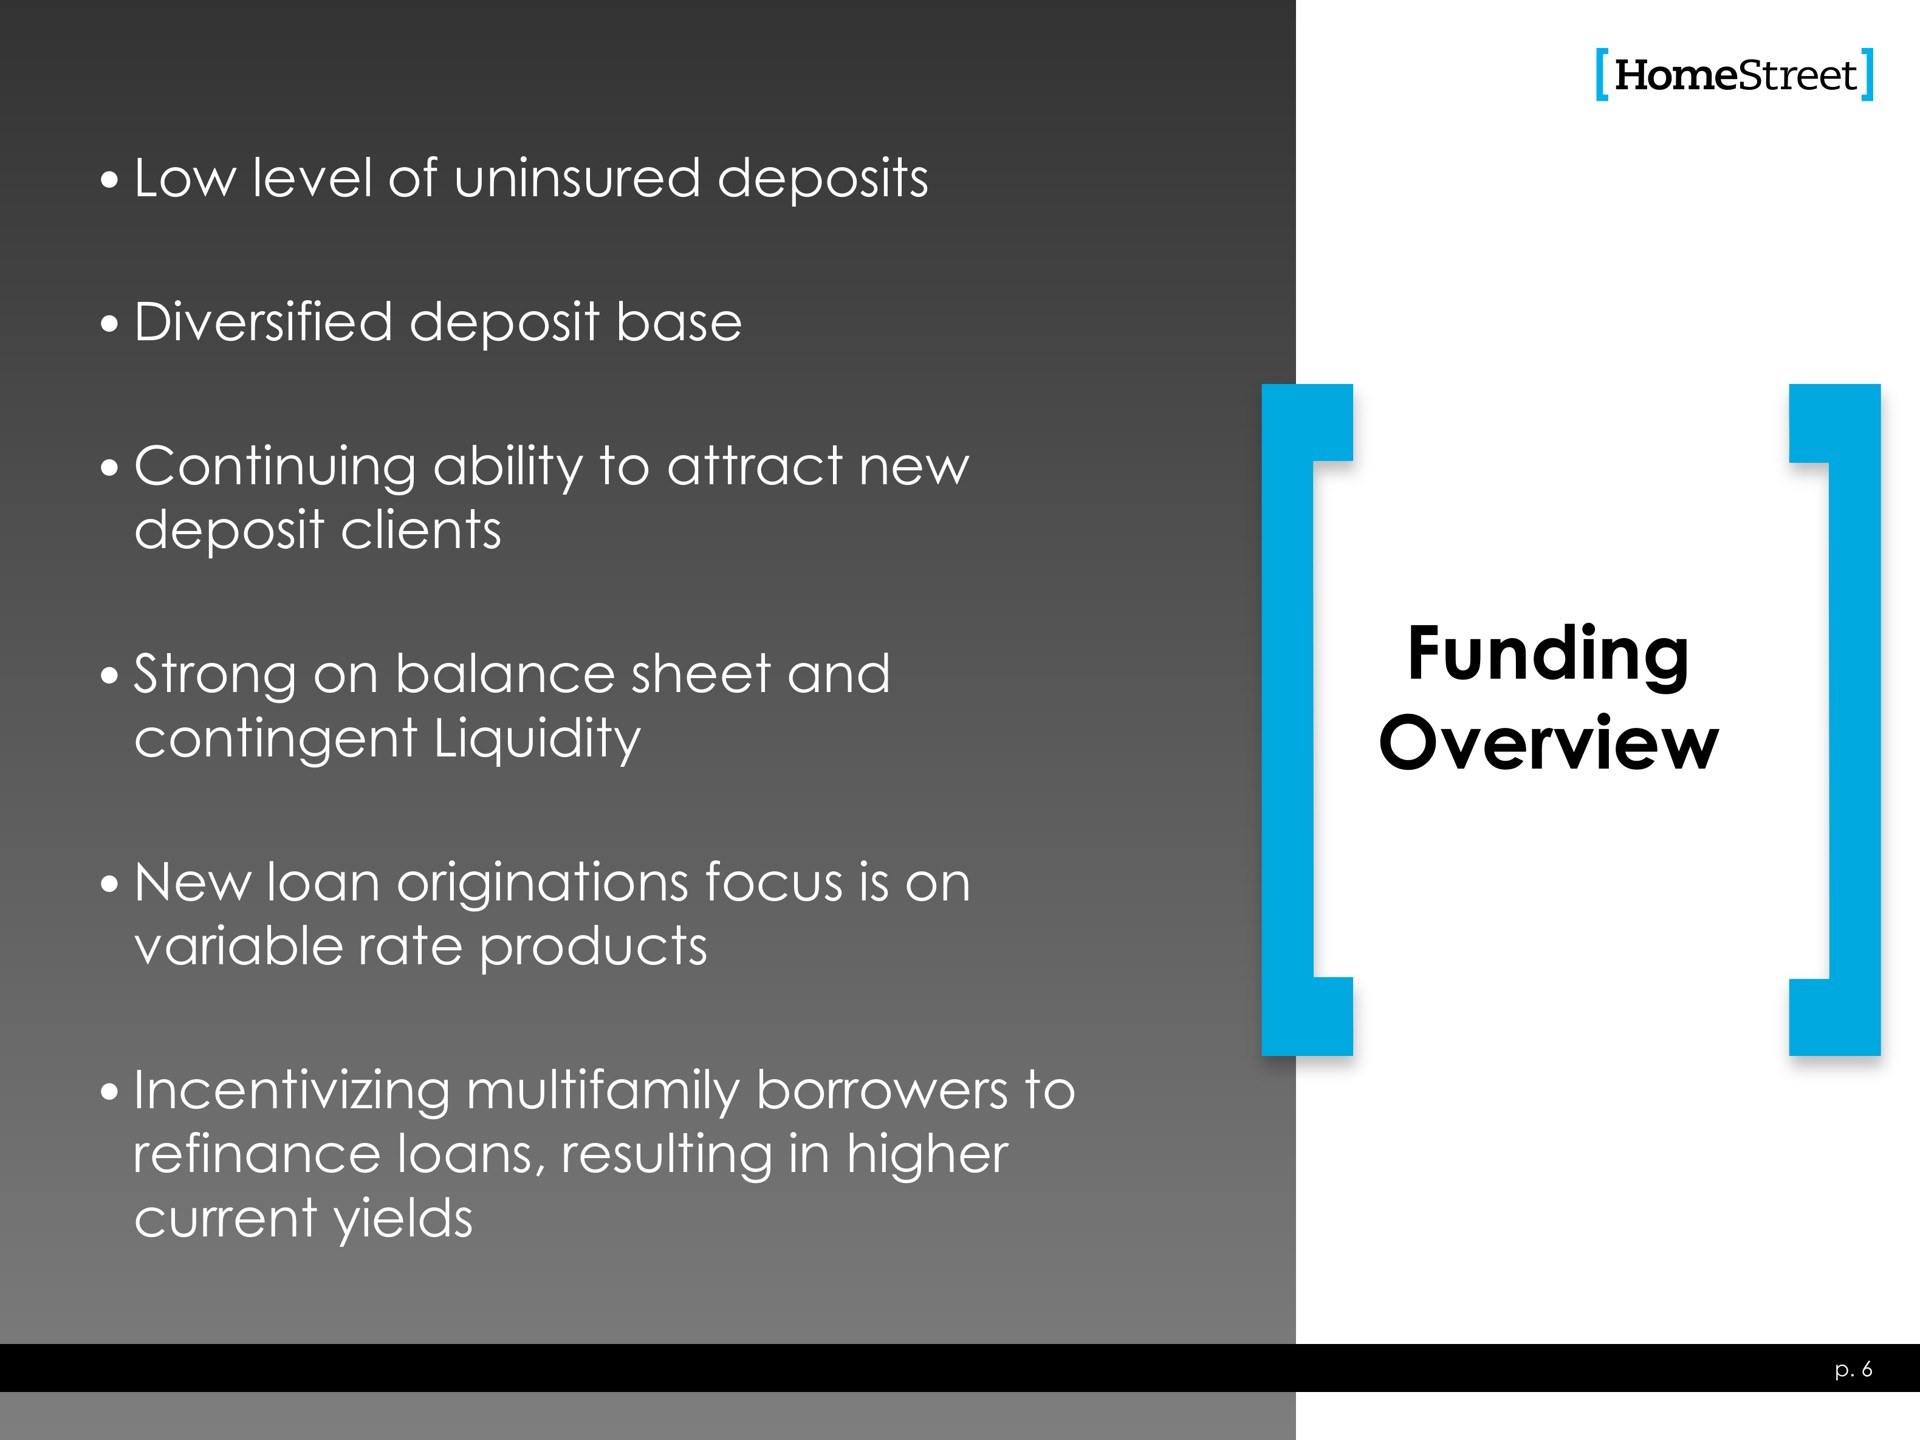 low level of uninsured deposits diversified deposit base continuing ability to attract new deposit clients strong on balance sheet and contingent liquidity new loan originations focus is on variable rate products borrowers to refinance loans resulting in higher current yields funding overview | HomeStreet